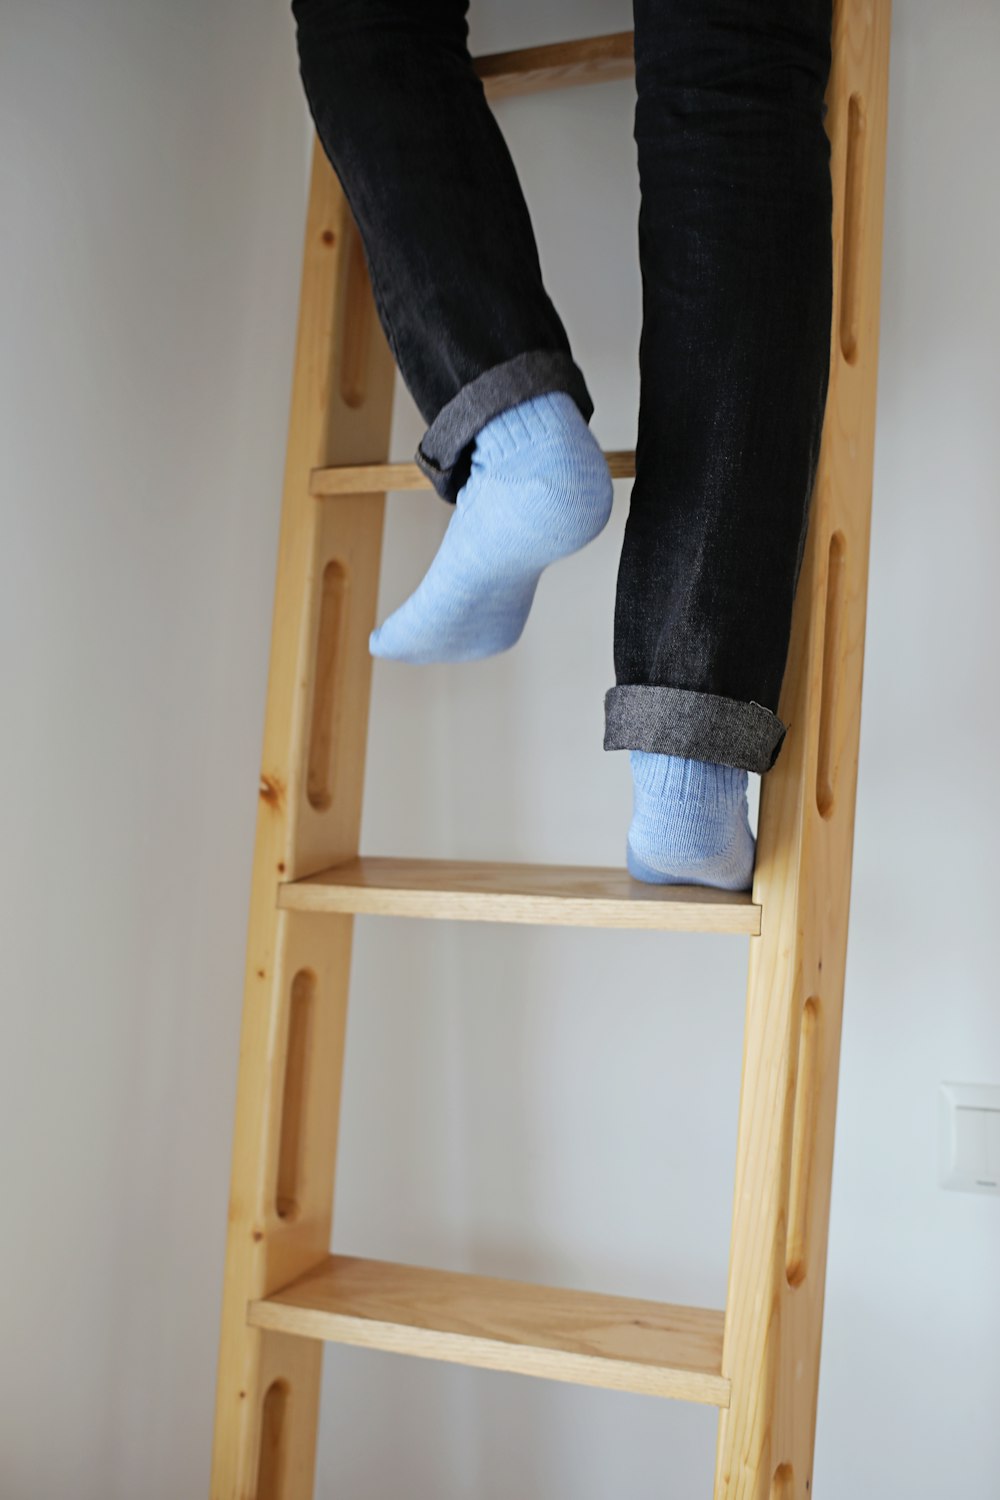 a person standing on a ladder with their feet up